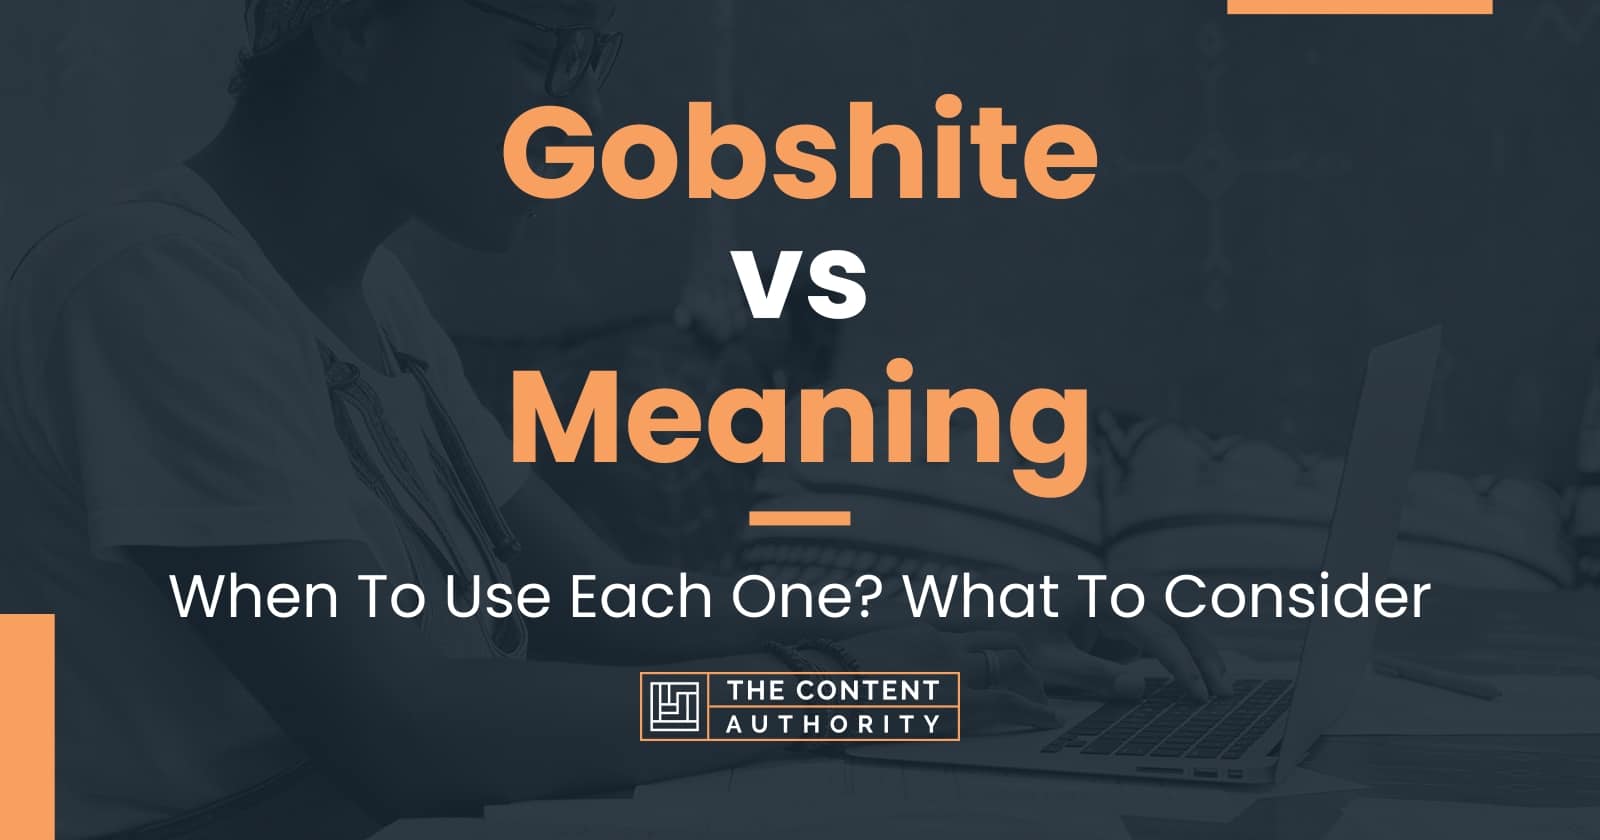 Gobshite vs Meaning: When To Use Each One? What To Consider